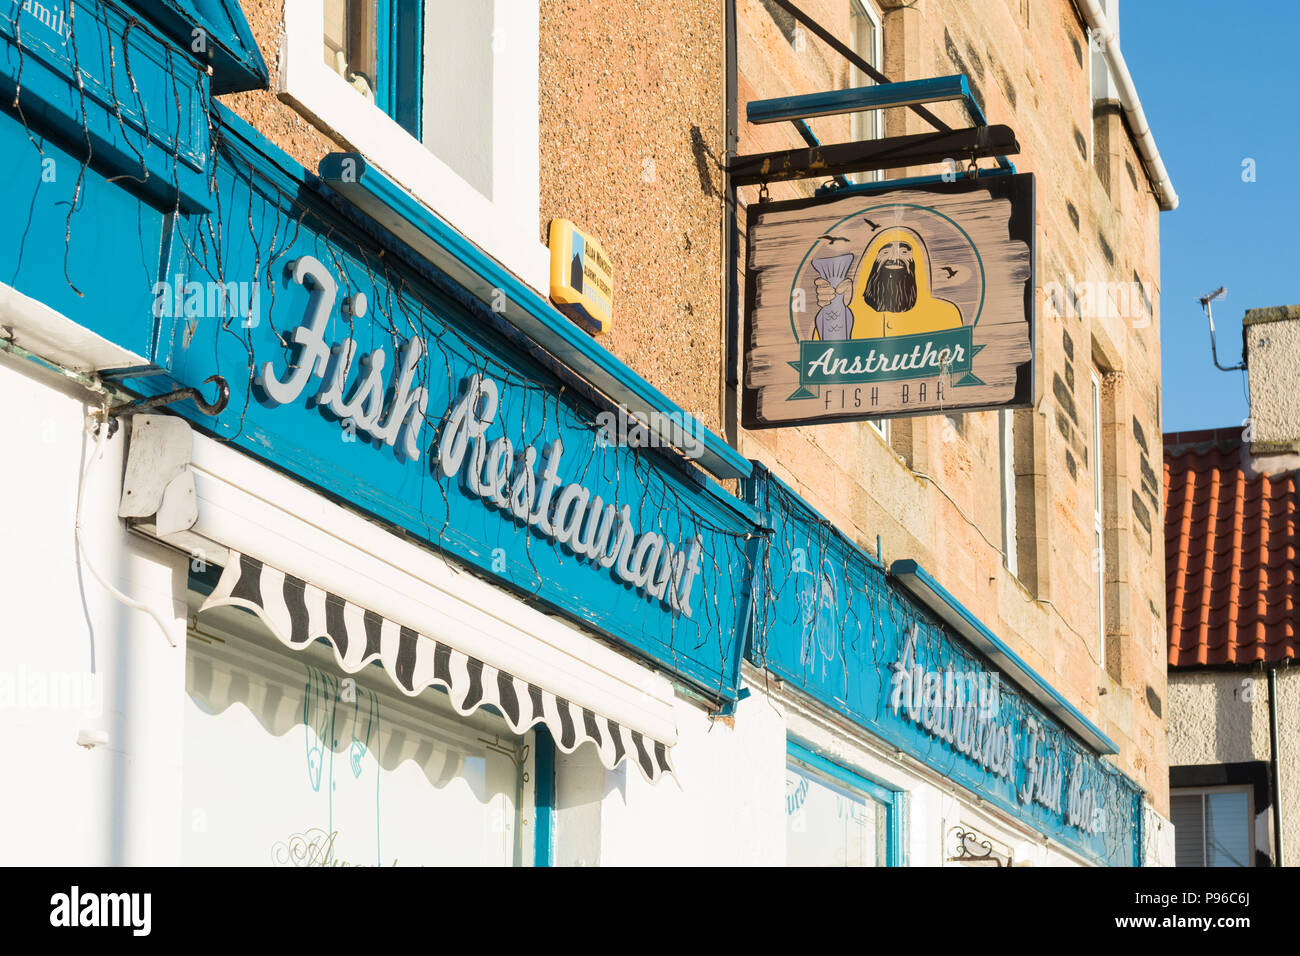 Anstruther fish bar and restaurant, Anstruther, Fife, Scotland, UK Stock Photo